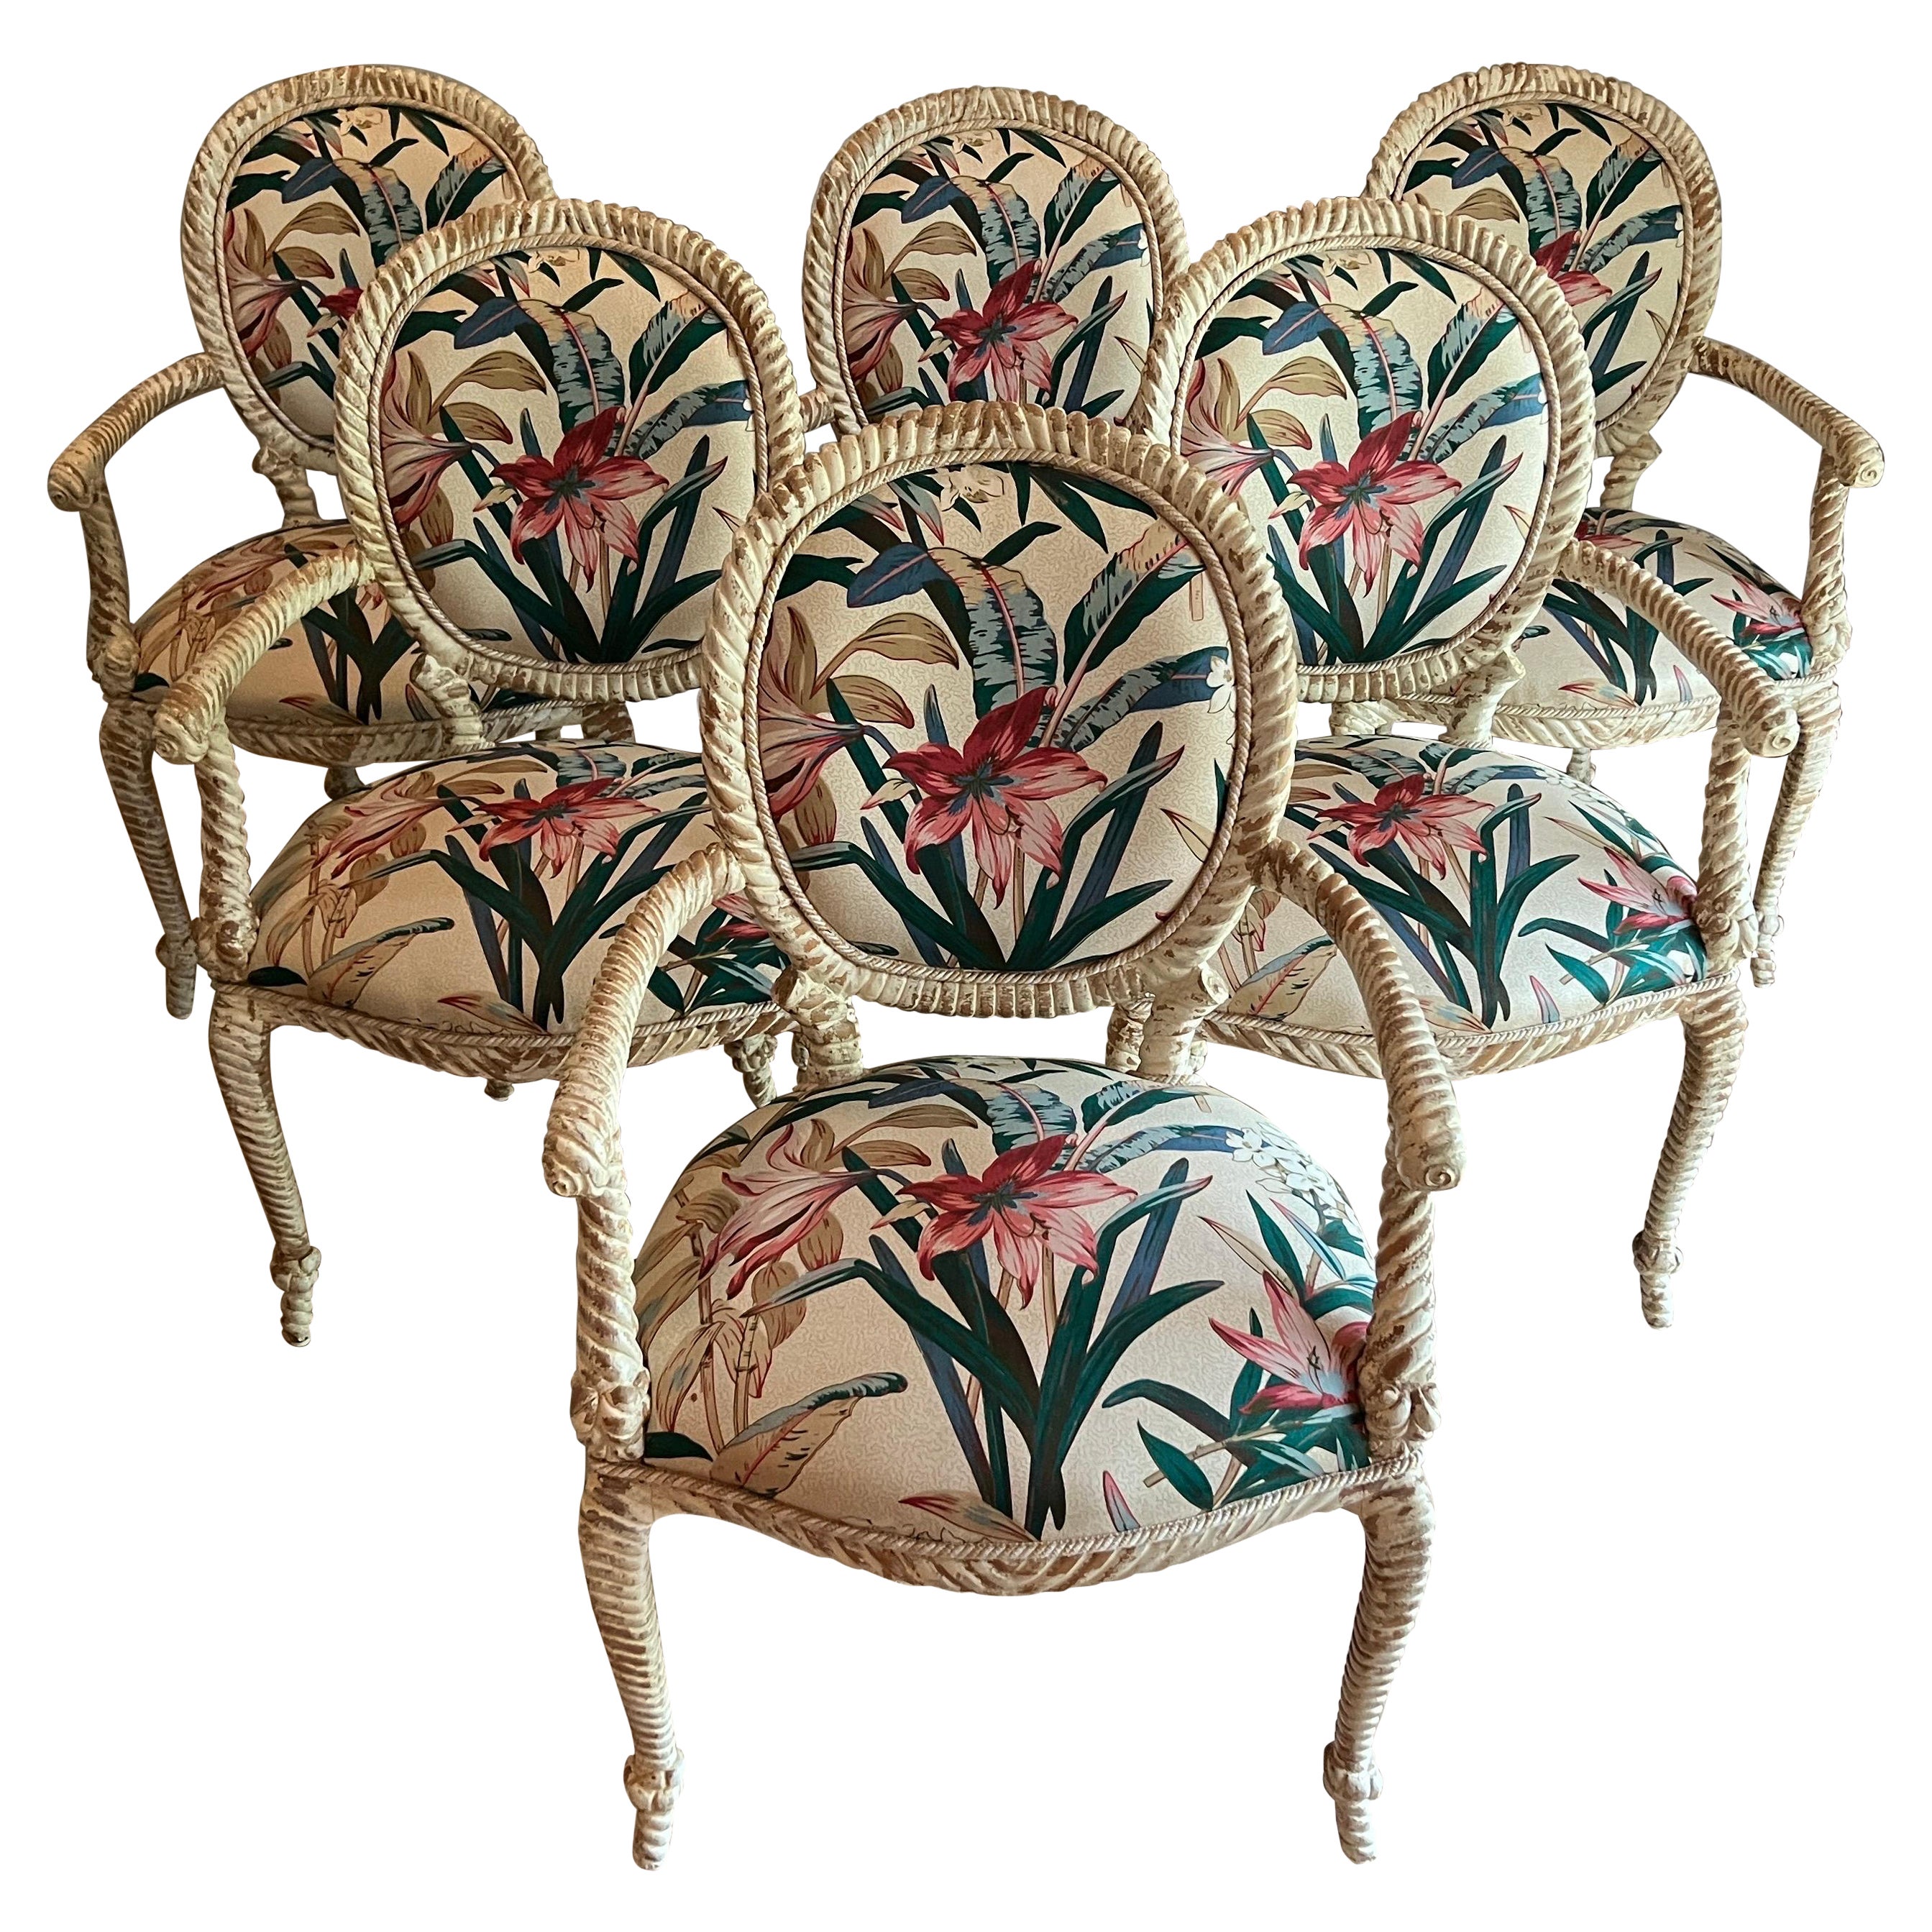 Vintage Faux Bois Distressed White Painted Carved Wood Armchairs Sold in Pairs